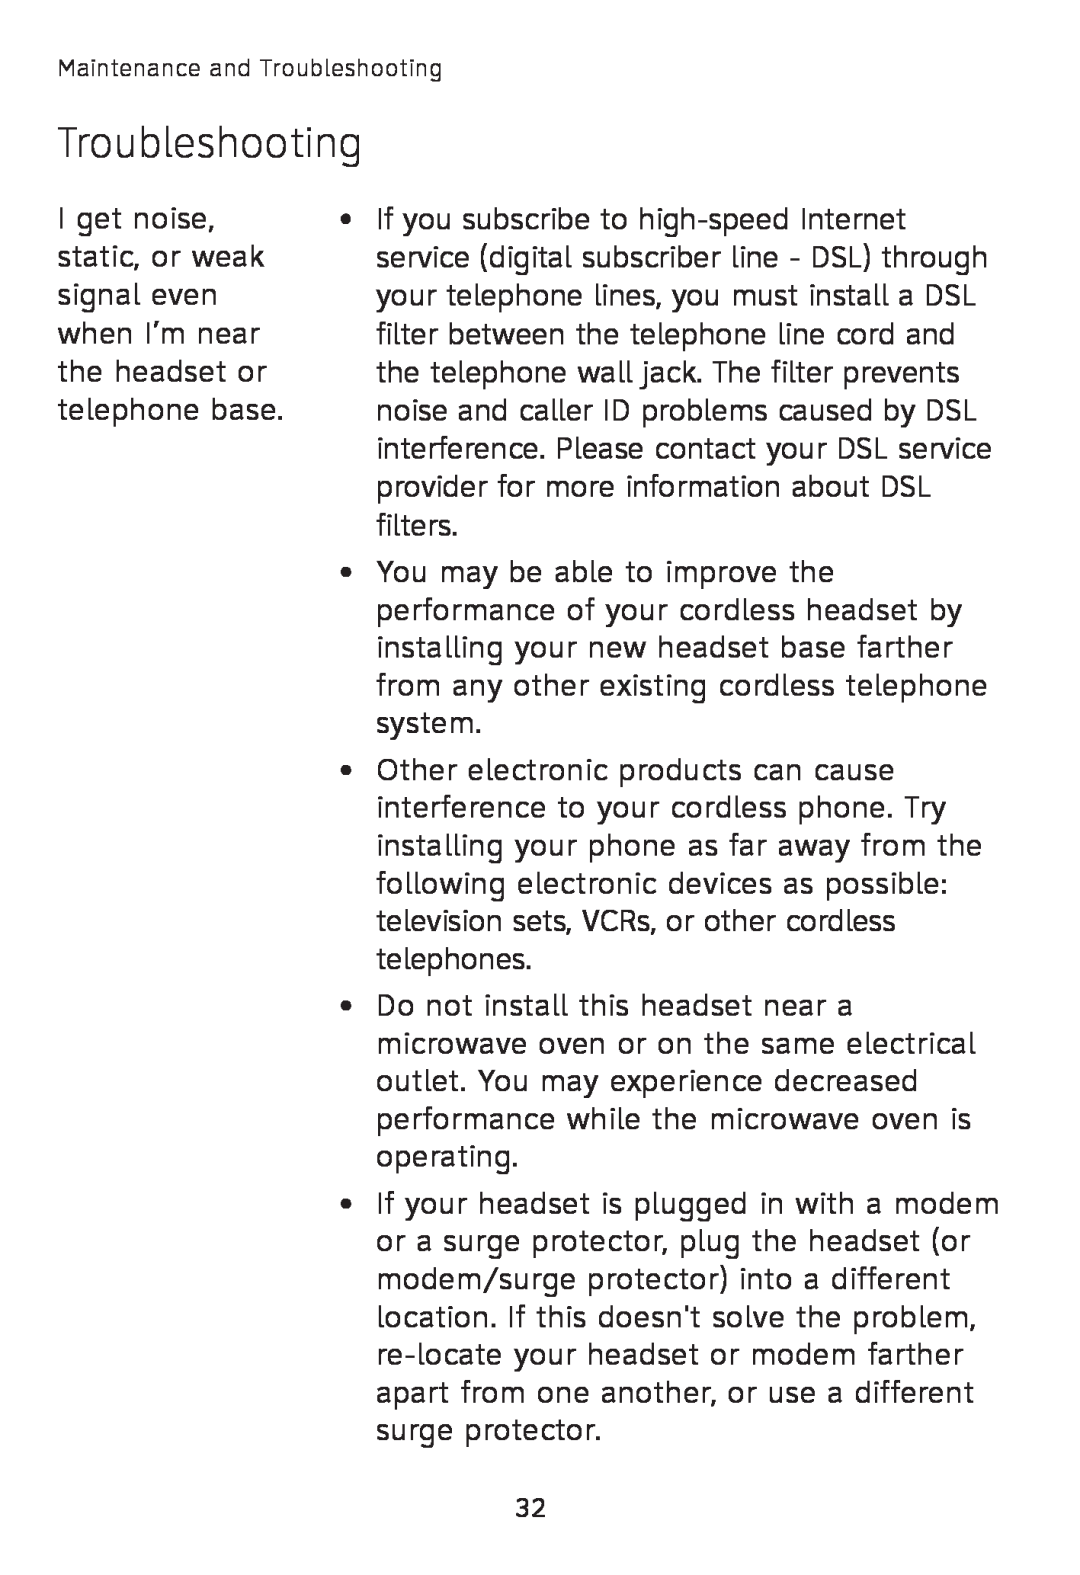 AT&T TL7600 user manual Troubleshooting, I get noise 